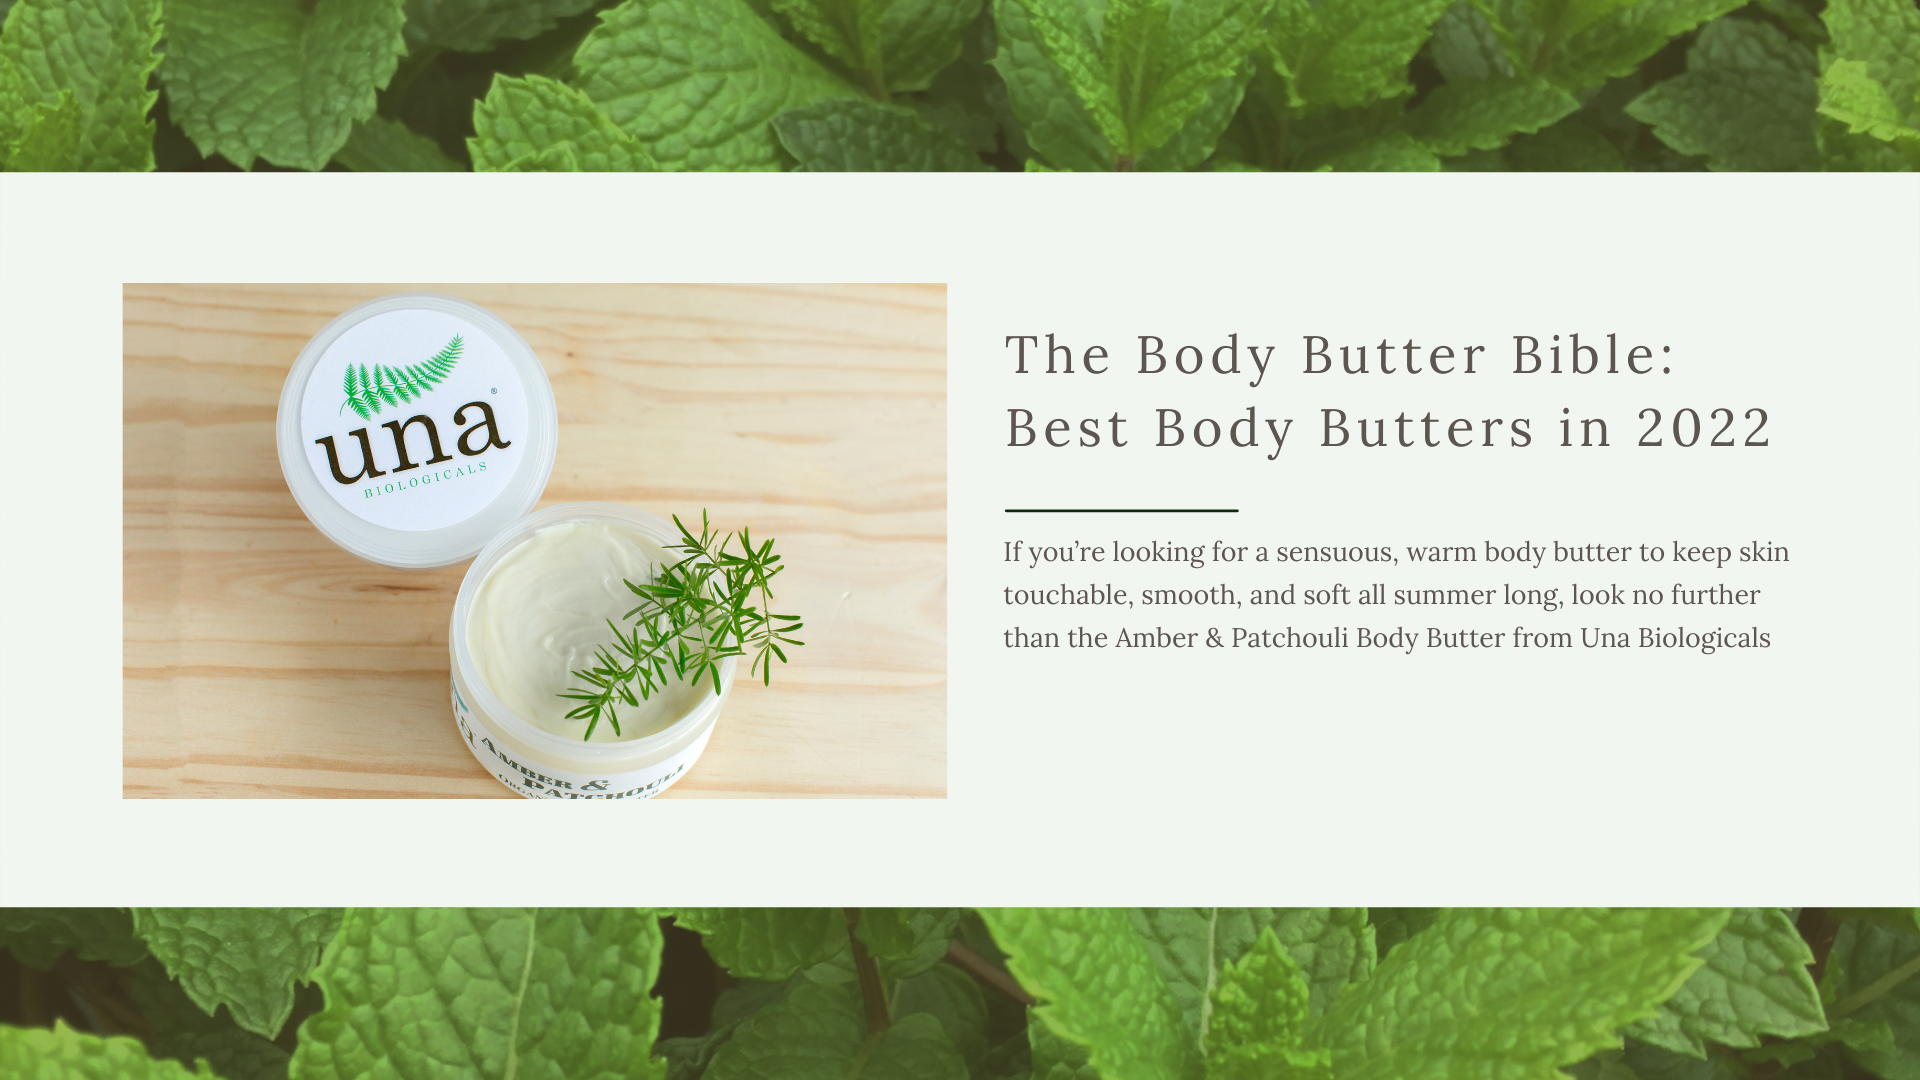 Amber and Patchouli Body Butter